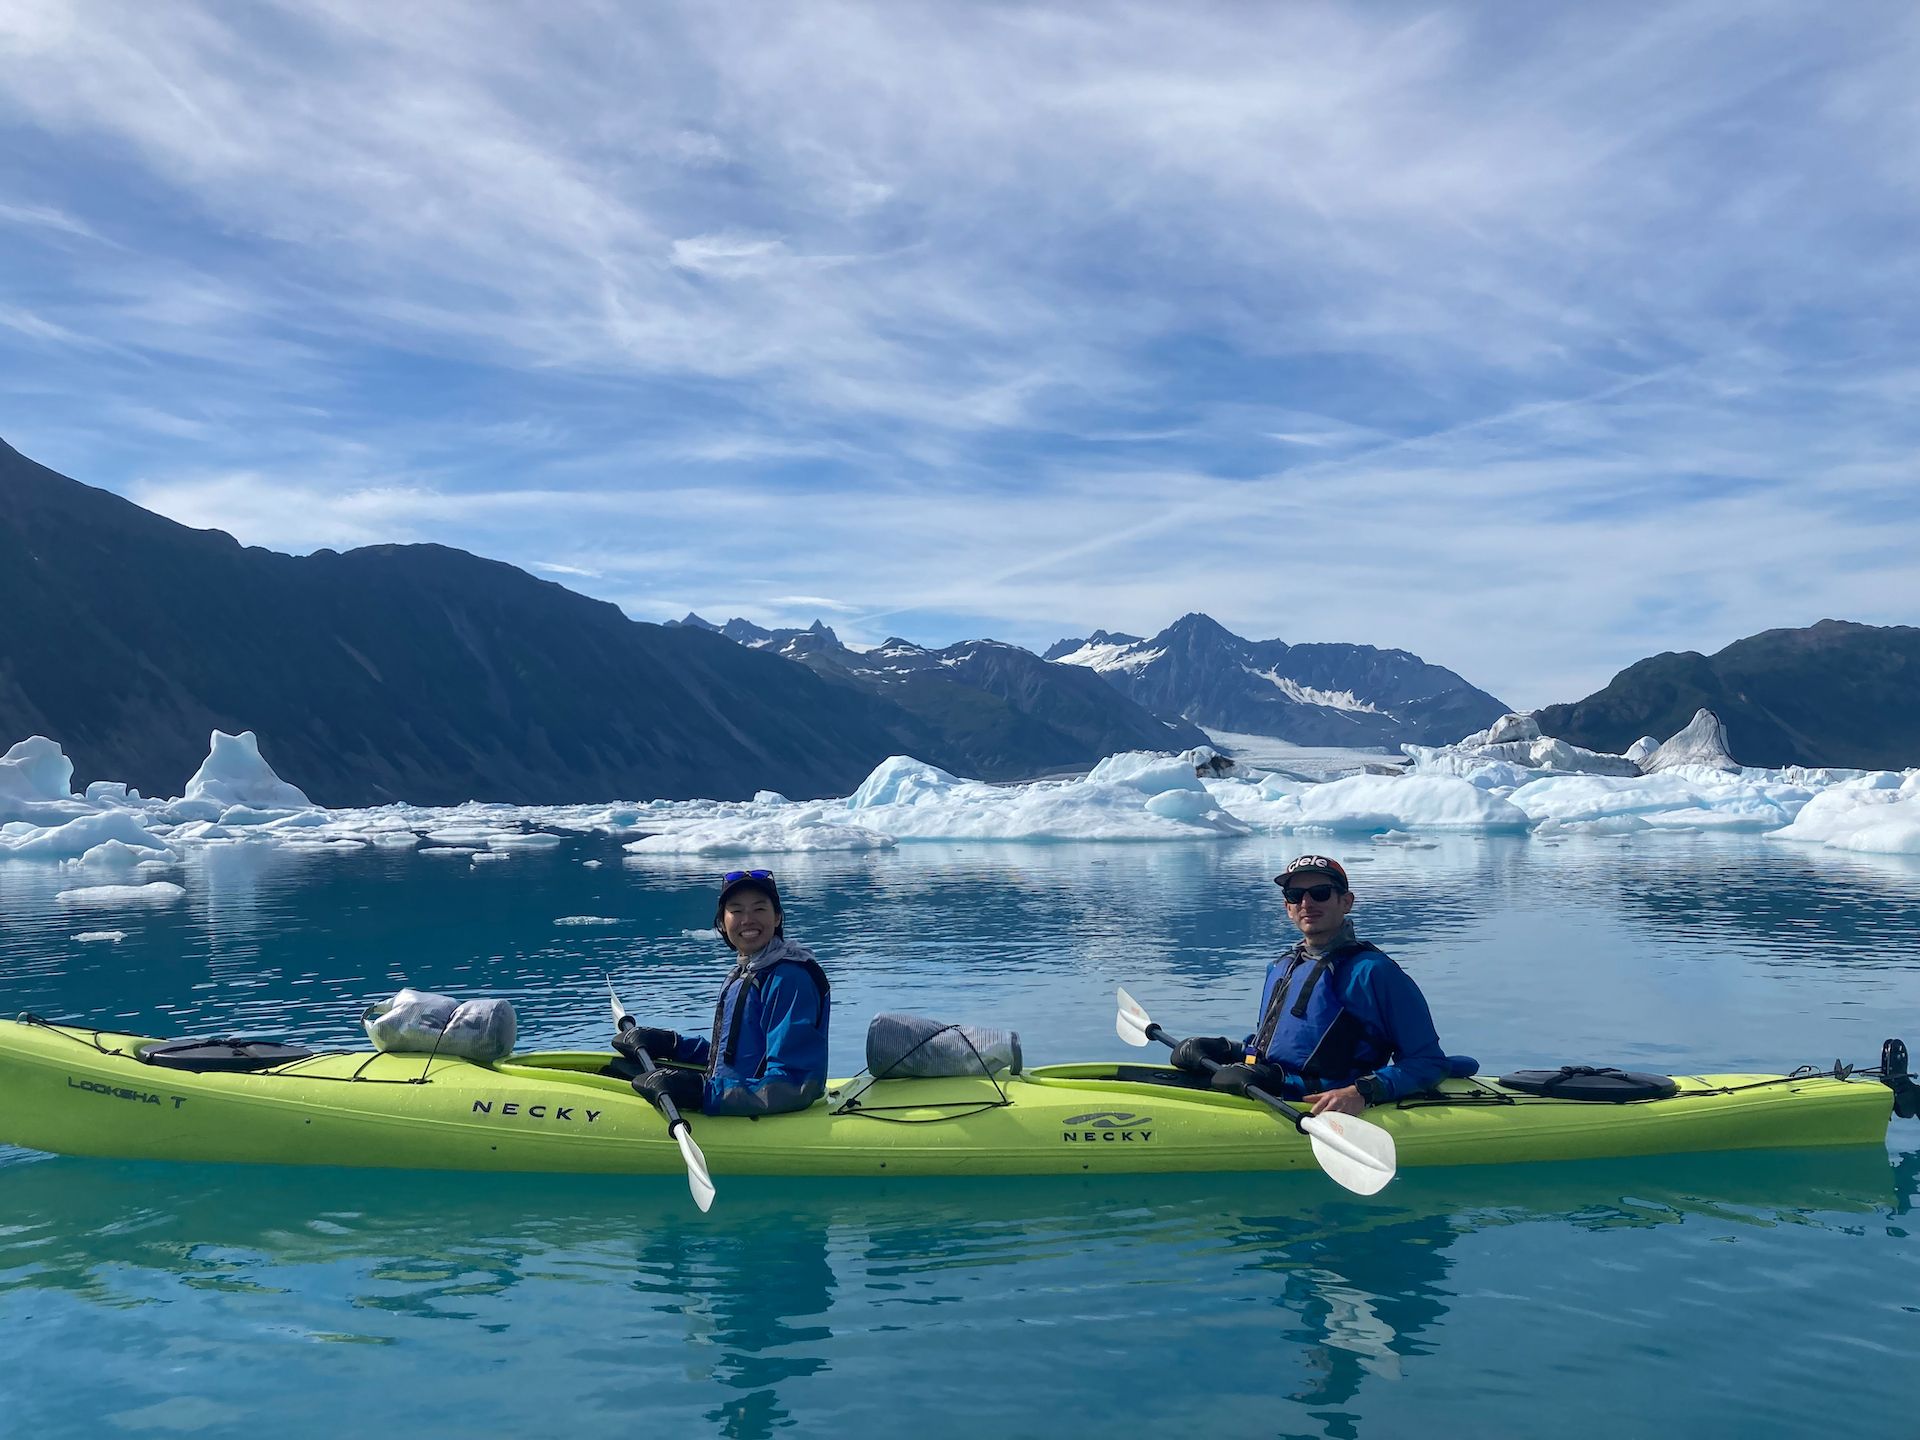 Happy paddlers with Bear Glacier in the background. The glacier was roughly 2 miles from where we were. While it is possible to get closer, the condition was hazardous with the thousands of large icebergs.